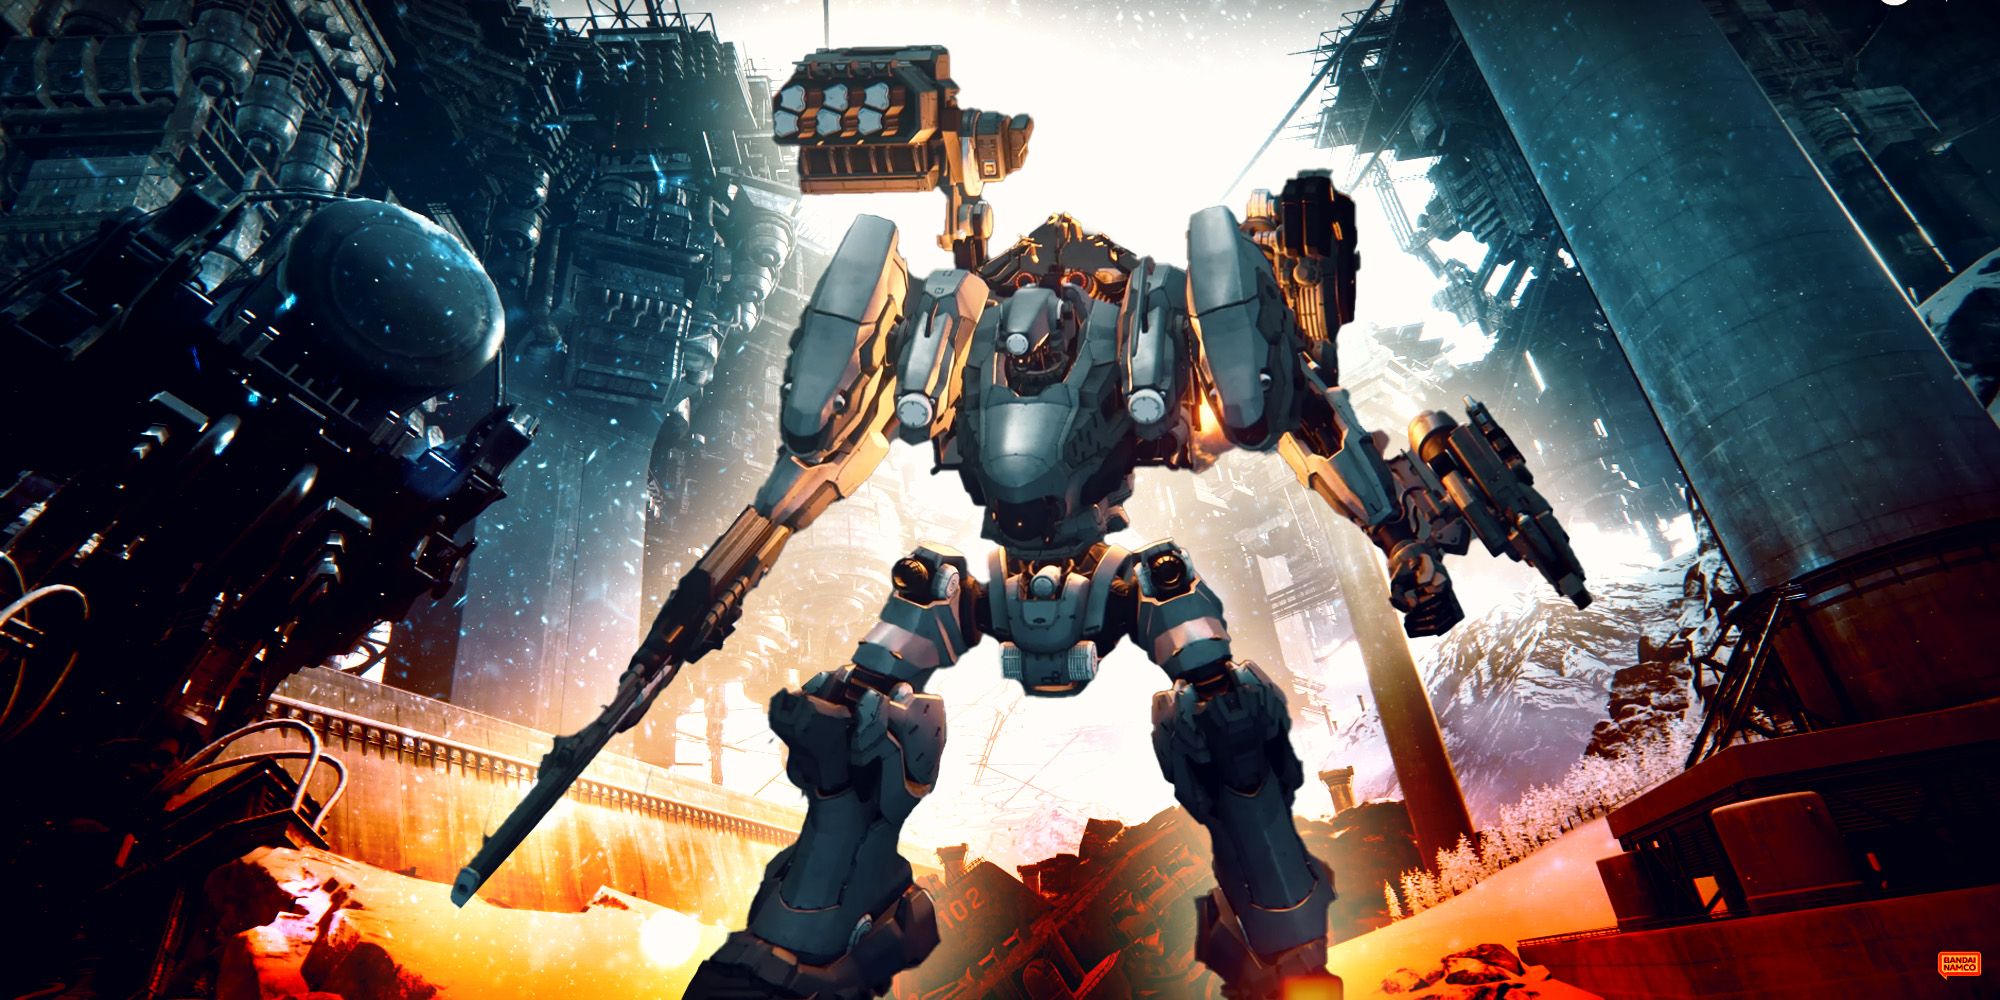 An Armored Core with a rifle and shoulder-mounted missile launcher, with a industrial setting in the background.